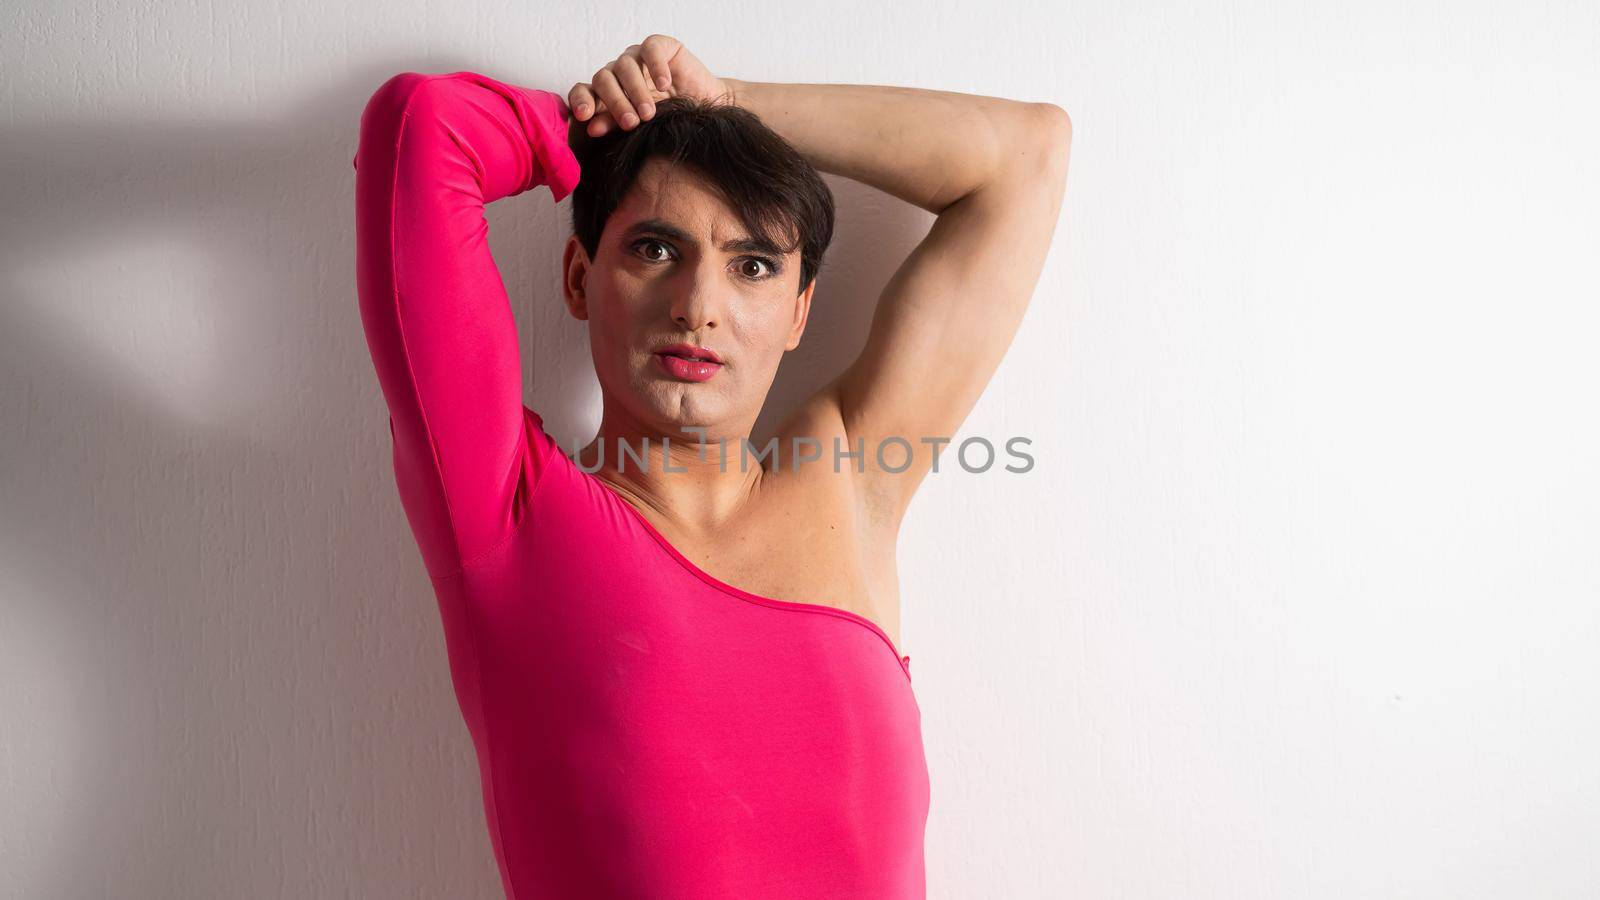 Homosexual in a pink female dress. A man in make-up